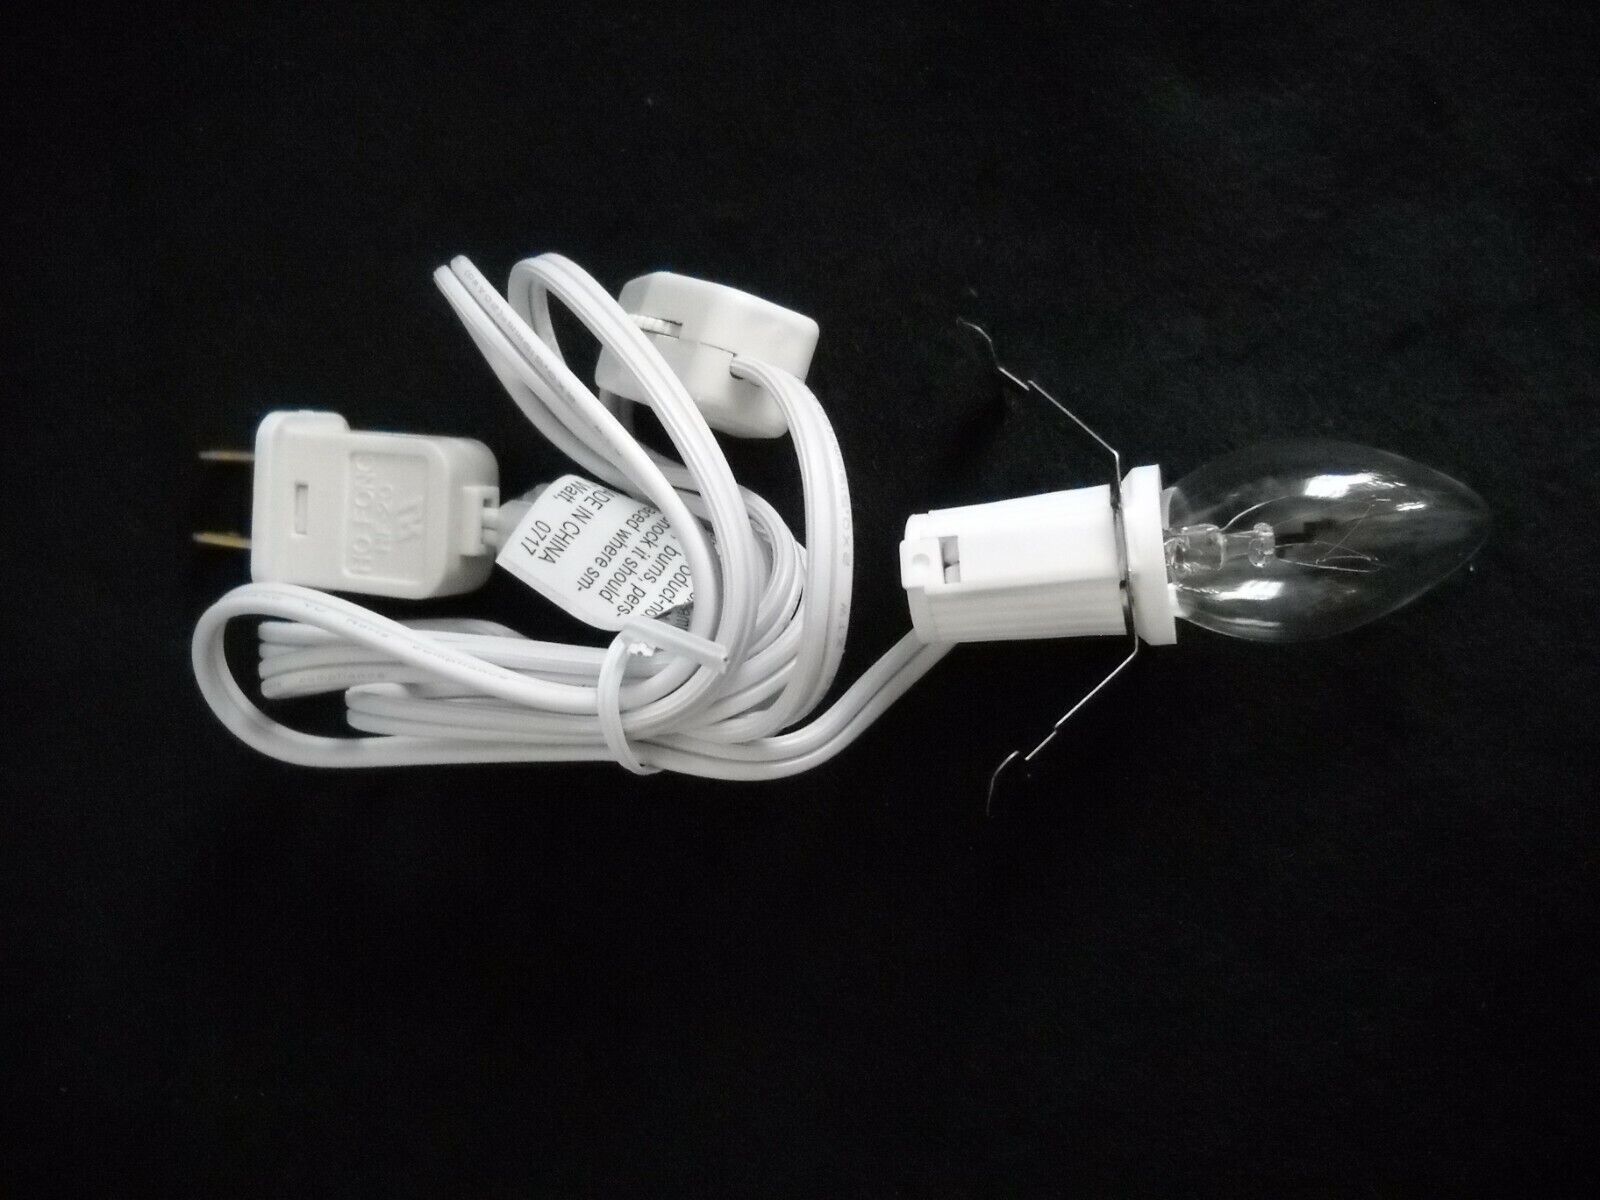 1 Light Cord for Christmas Village Buildings with on/off Switch White Cord